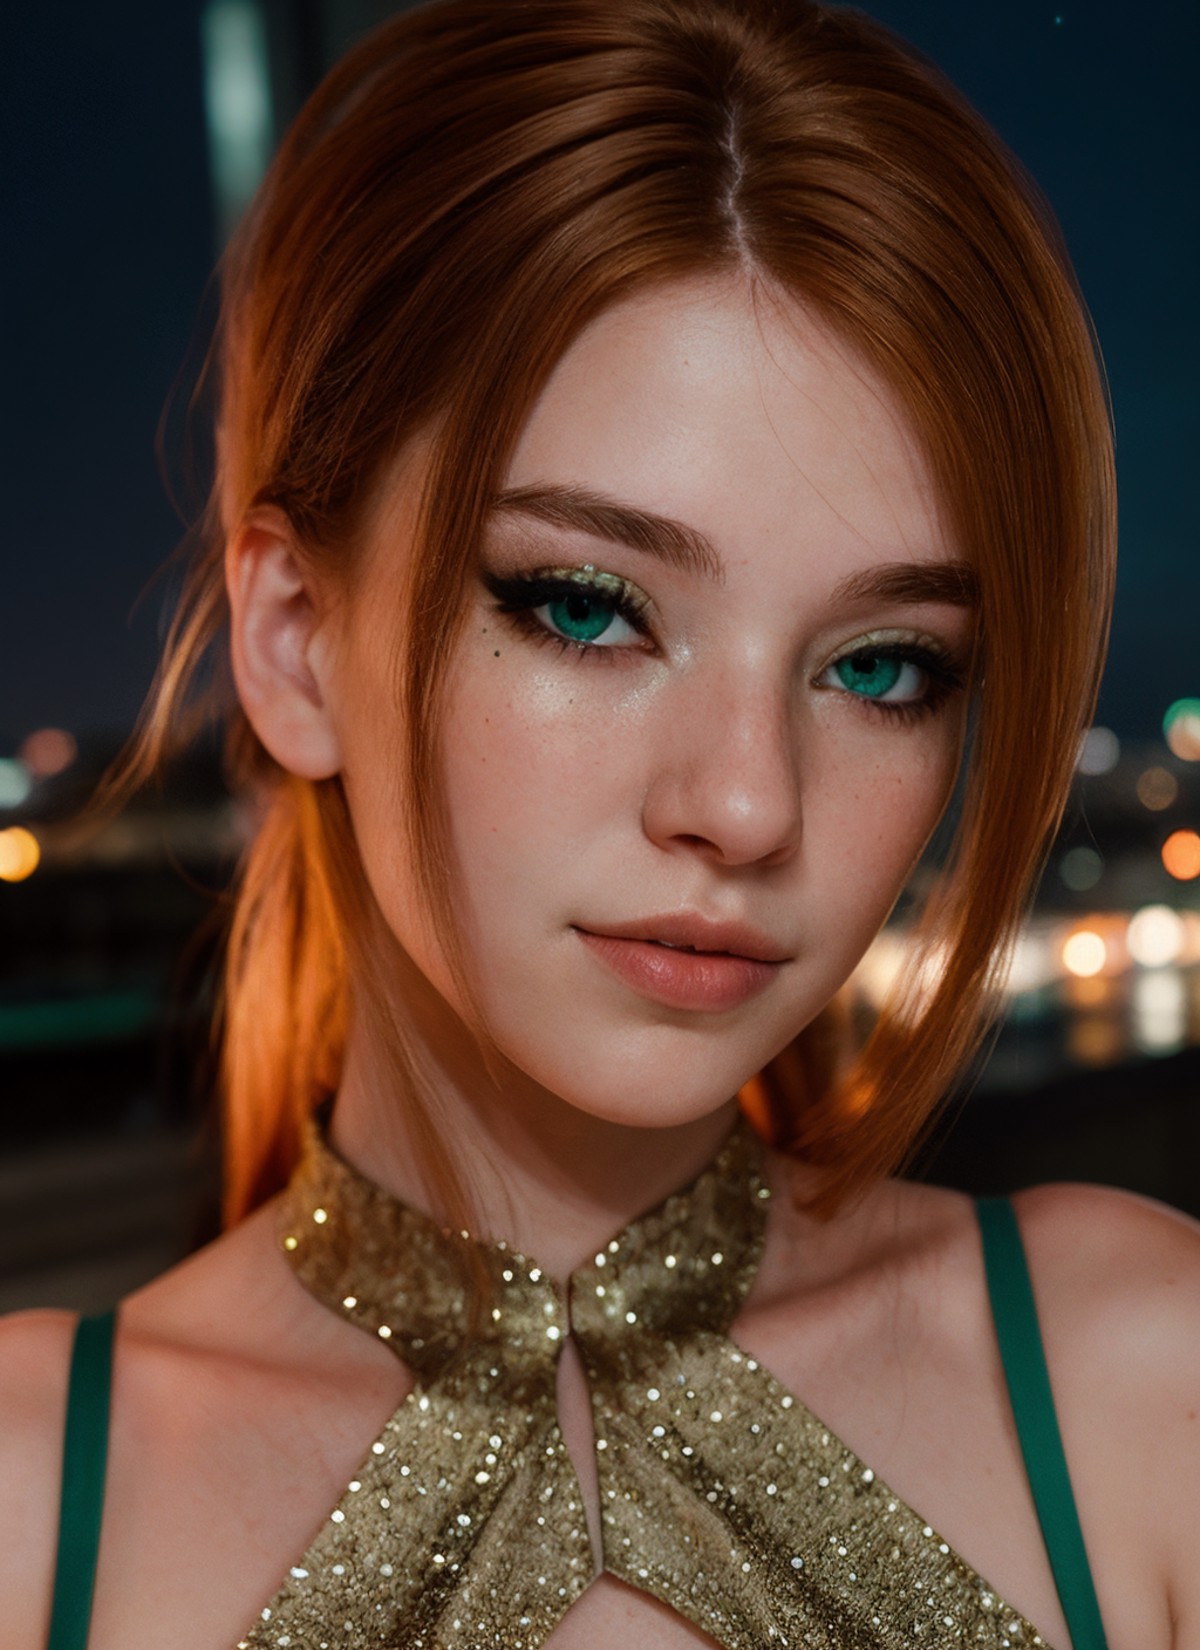 closeup portrait of girl, soft and dreamy portrait, beautiful, night photo, city at night background, wearing glitter dres...